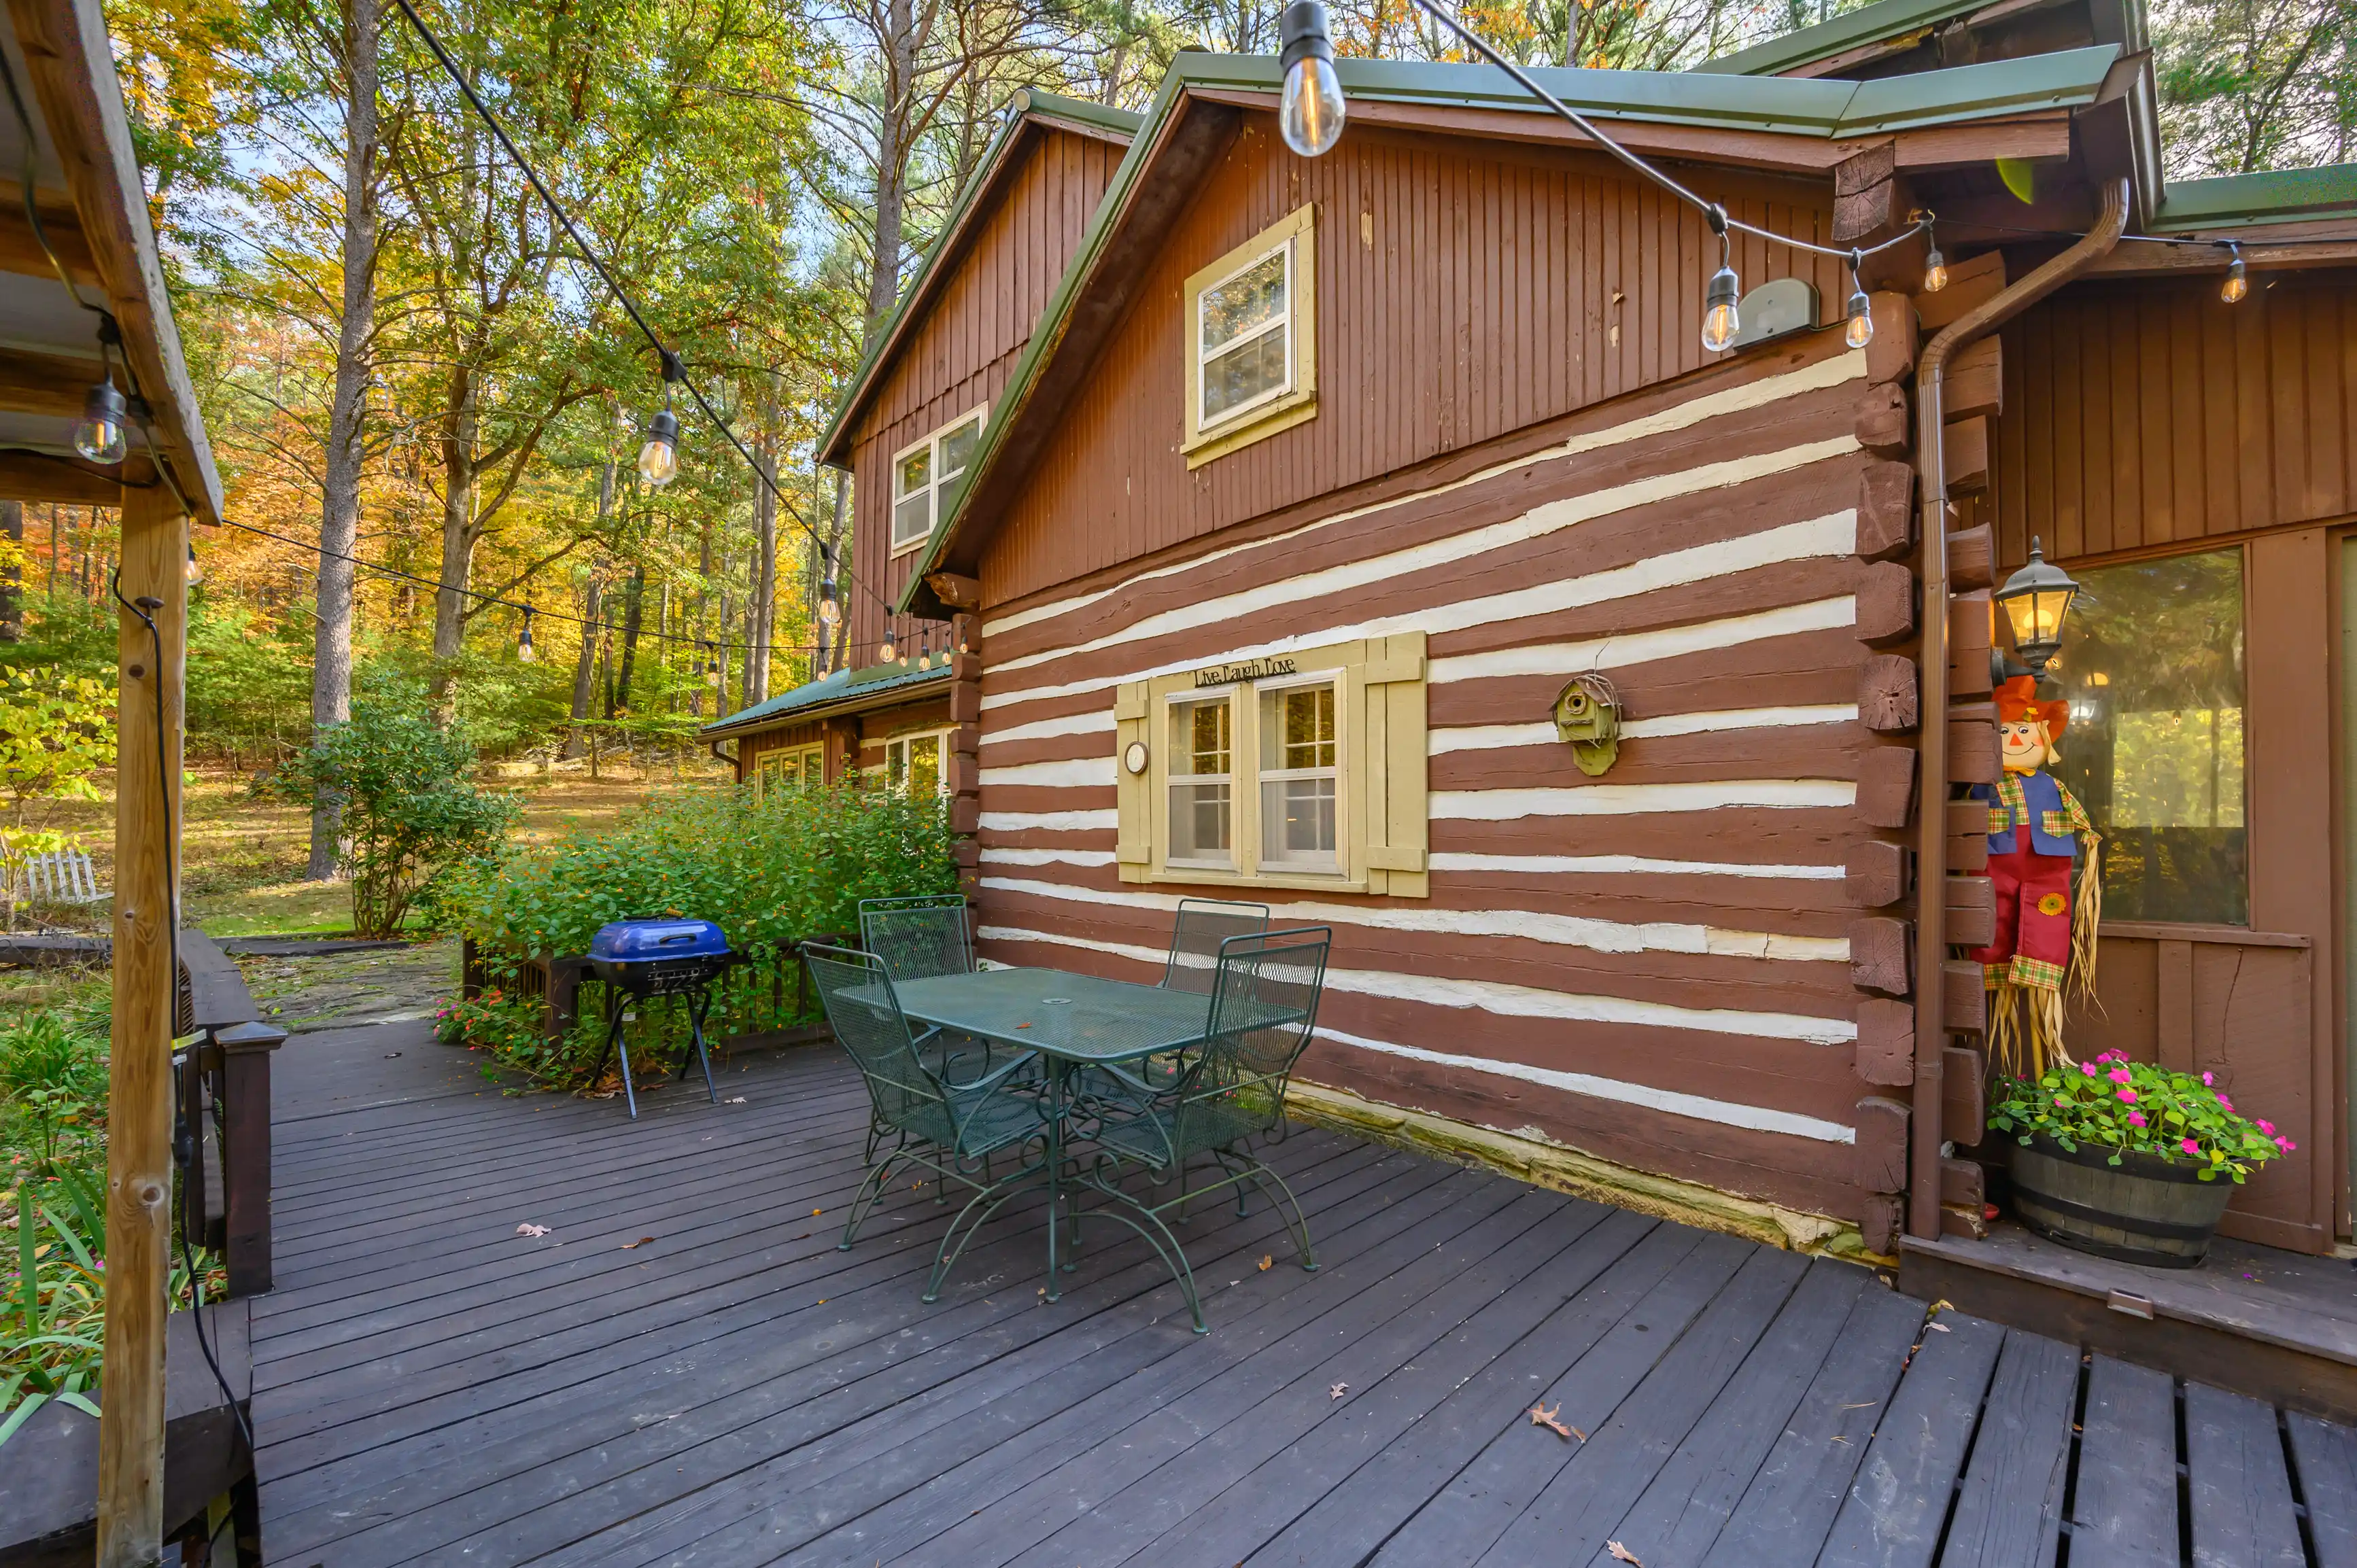 Cozy wooden cabin exterior with a deck area featuring a patio table and chairs surrounded by trees.